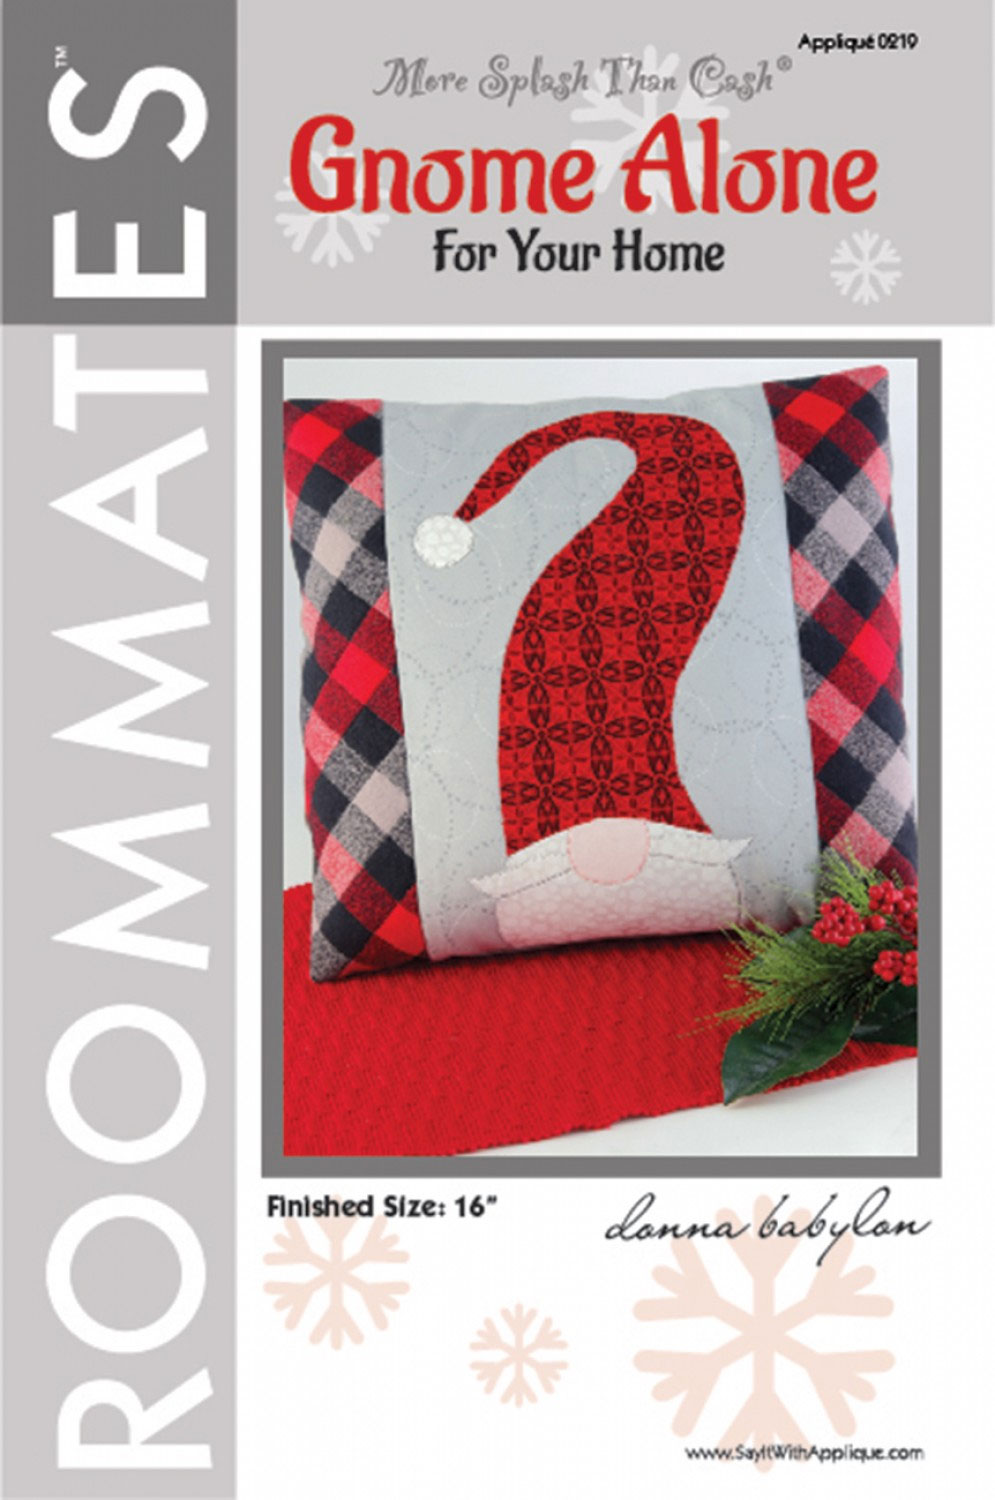 Gnome-Alone-for-your-home-sewing-pattern-More-Splash-Than-Cash-front